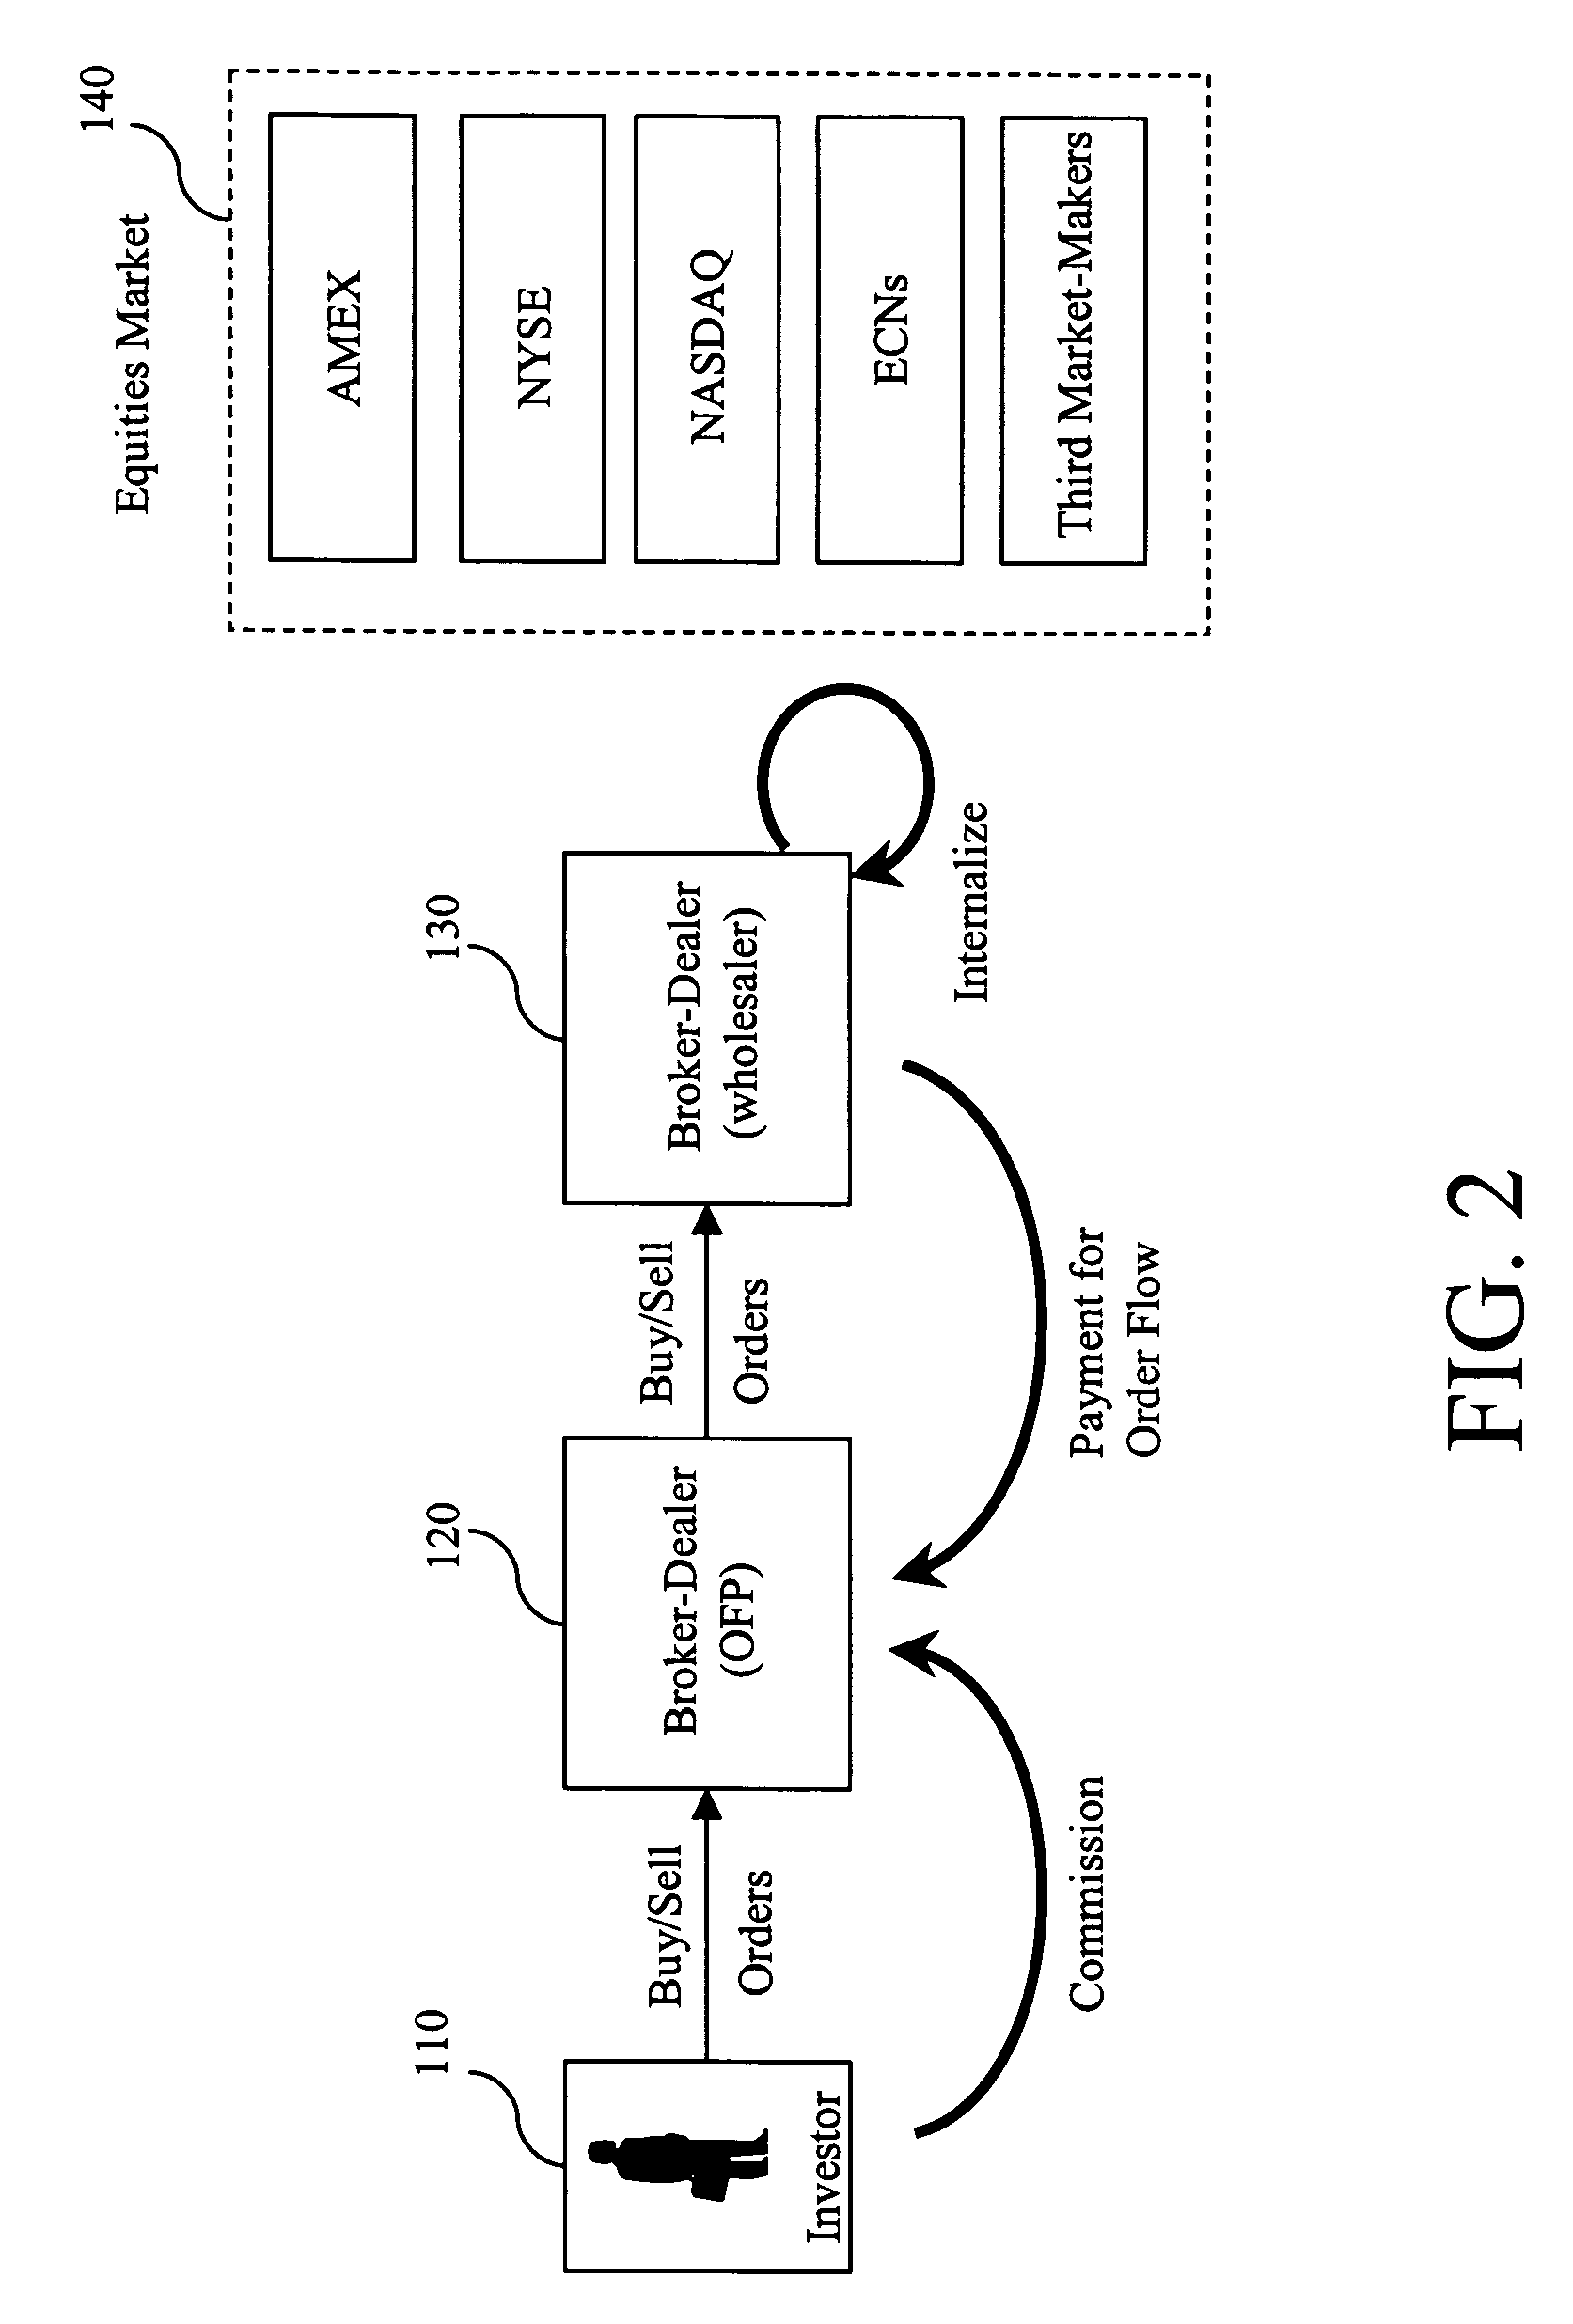 Computer implemented and/or assisted methods and systems for providing rapid execution of, for example, listed options contracts using toxicity and/or profit analyzers